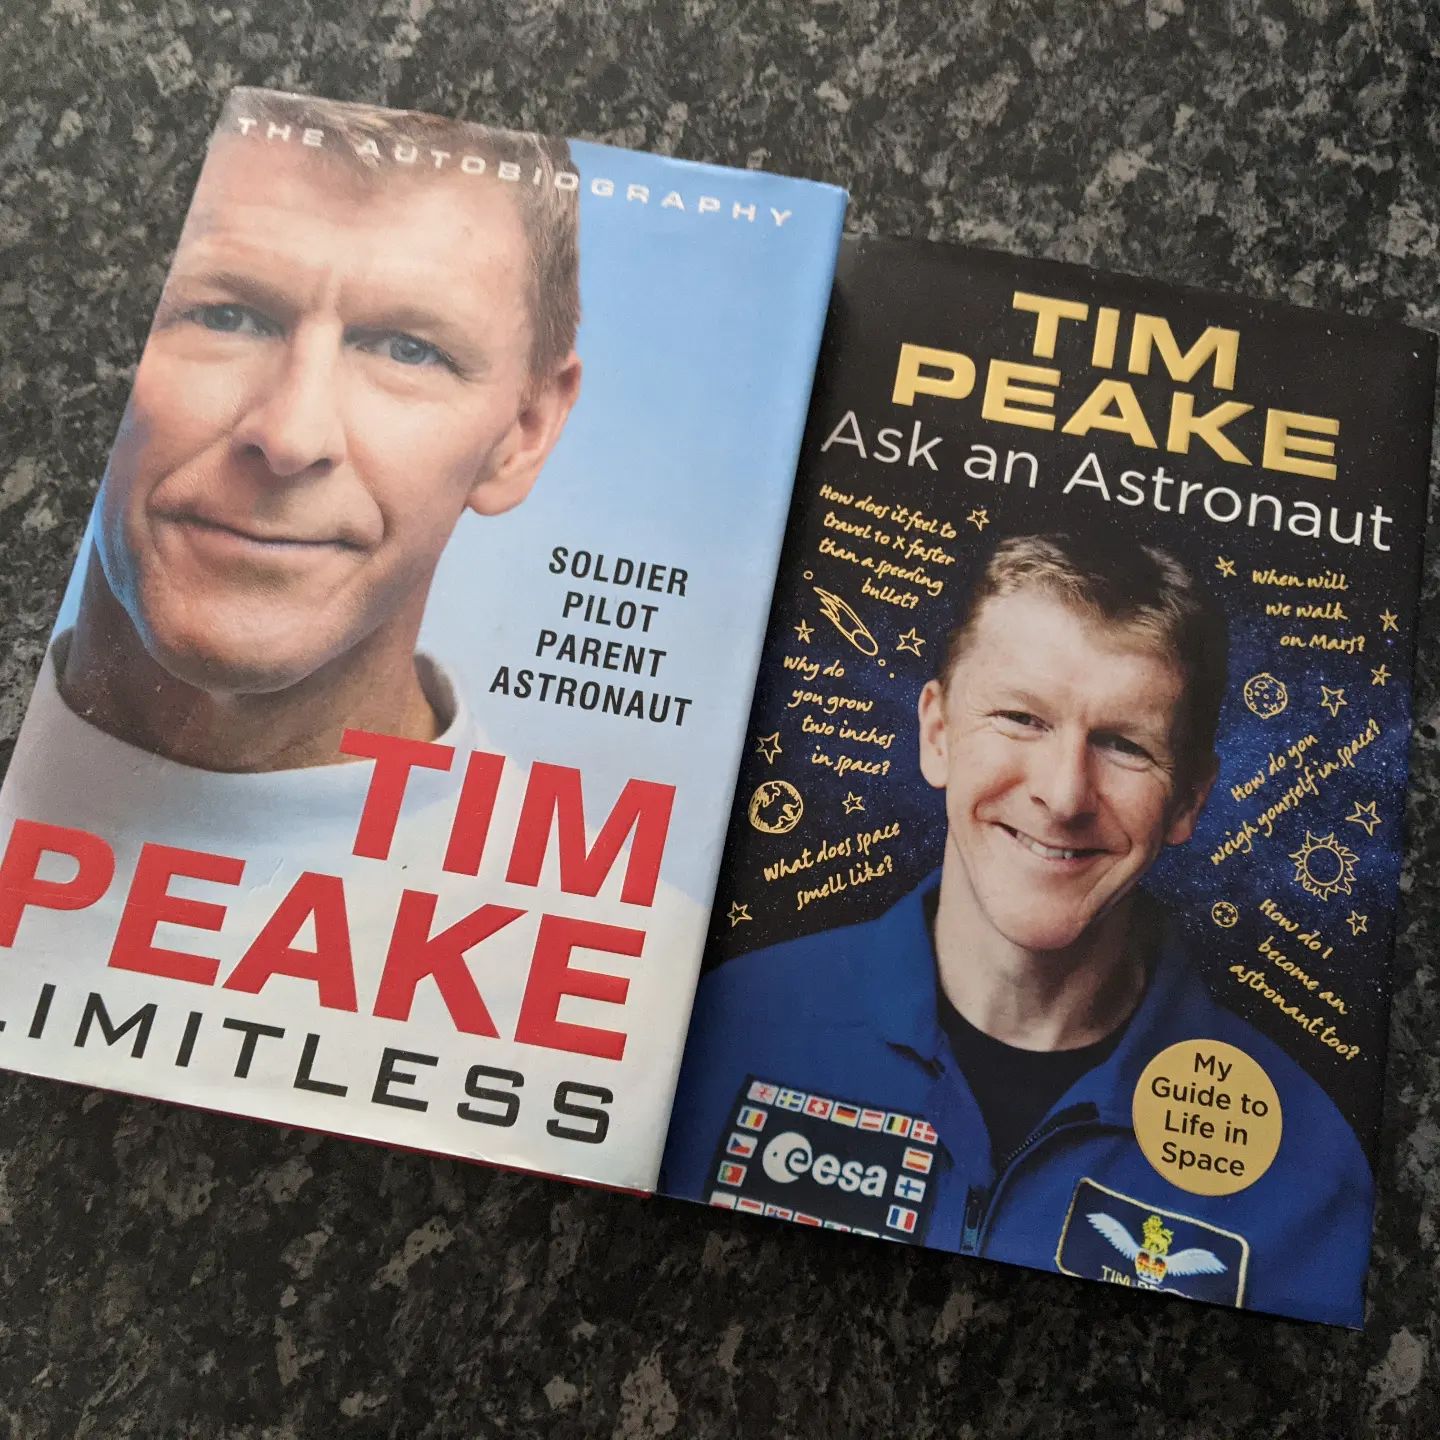 Not sure which of us is more excited about the eldest's Christmas present this evening, off to see @astro_timpeake in Oxford!Books going into bag just in case one scout gets to meet another!#scouts #scouting #space #timpeake